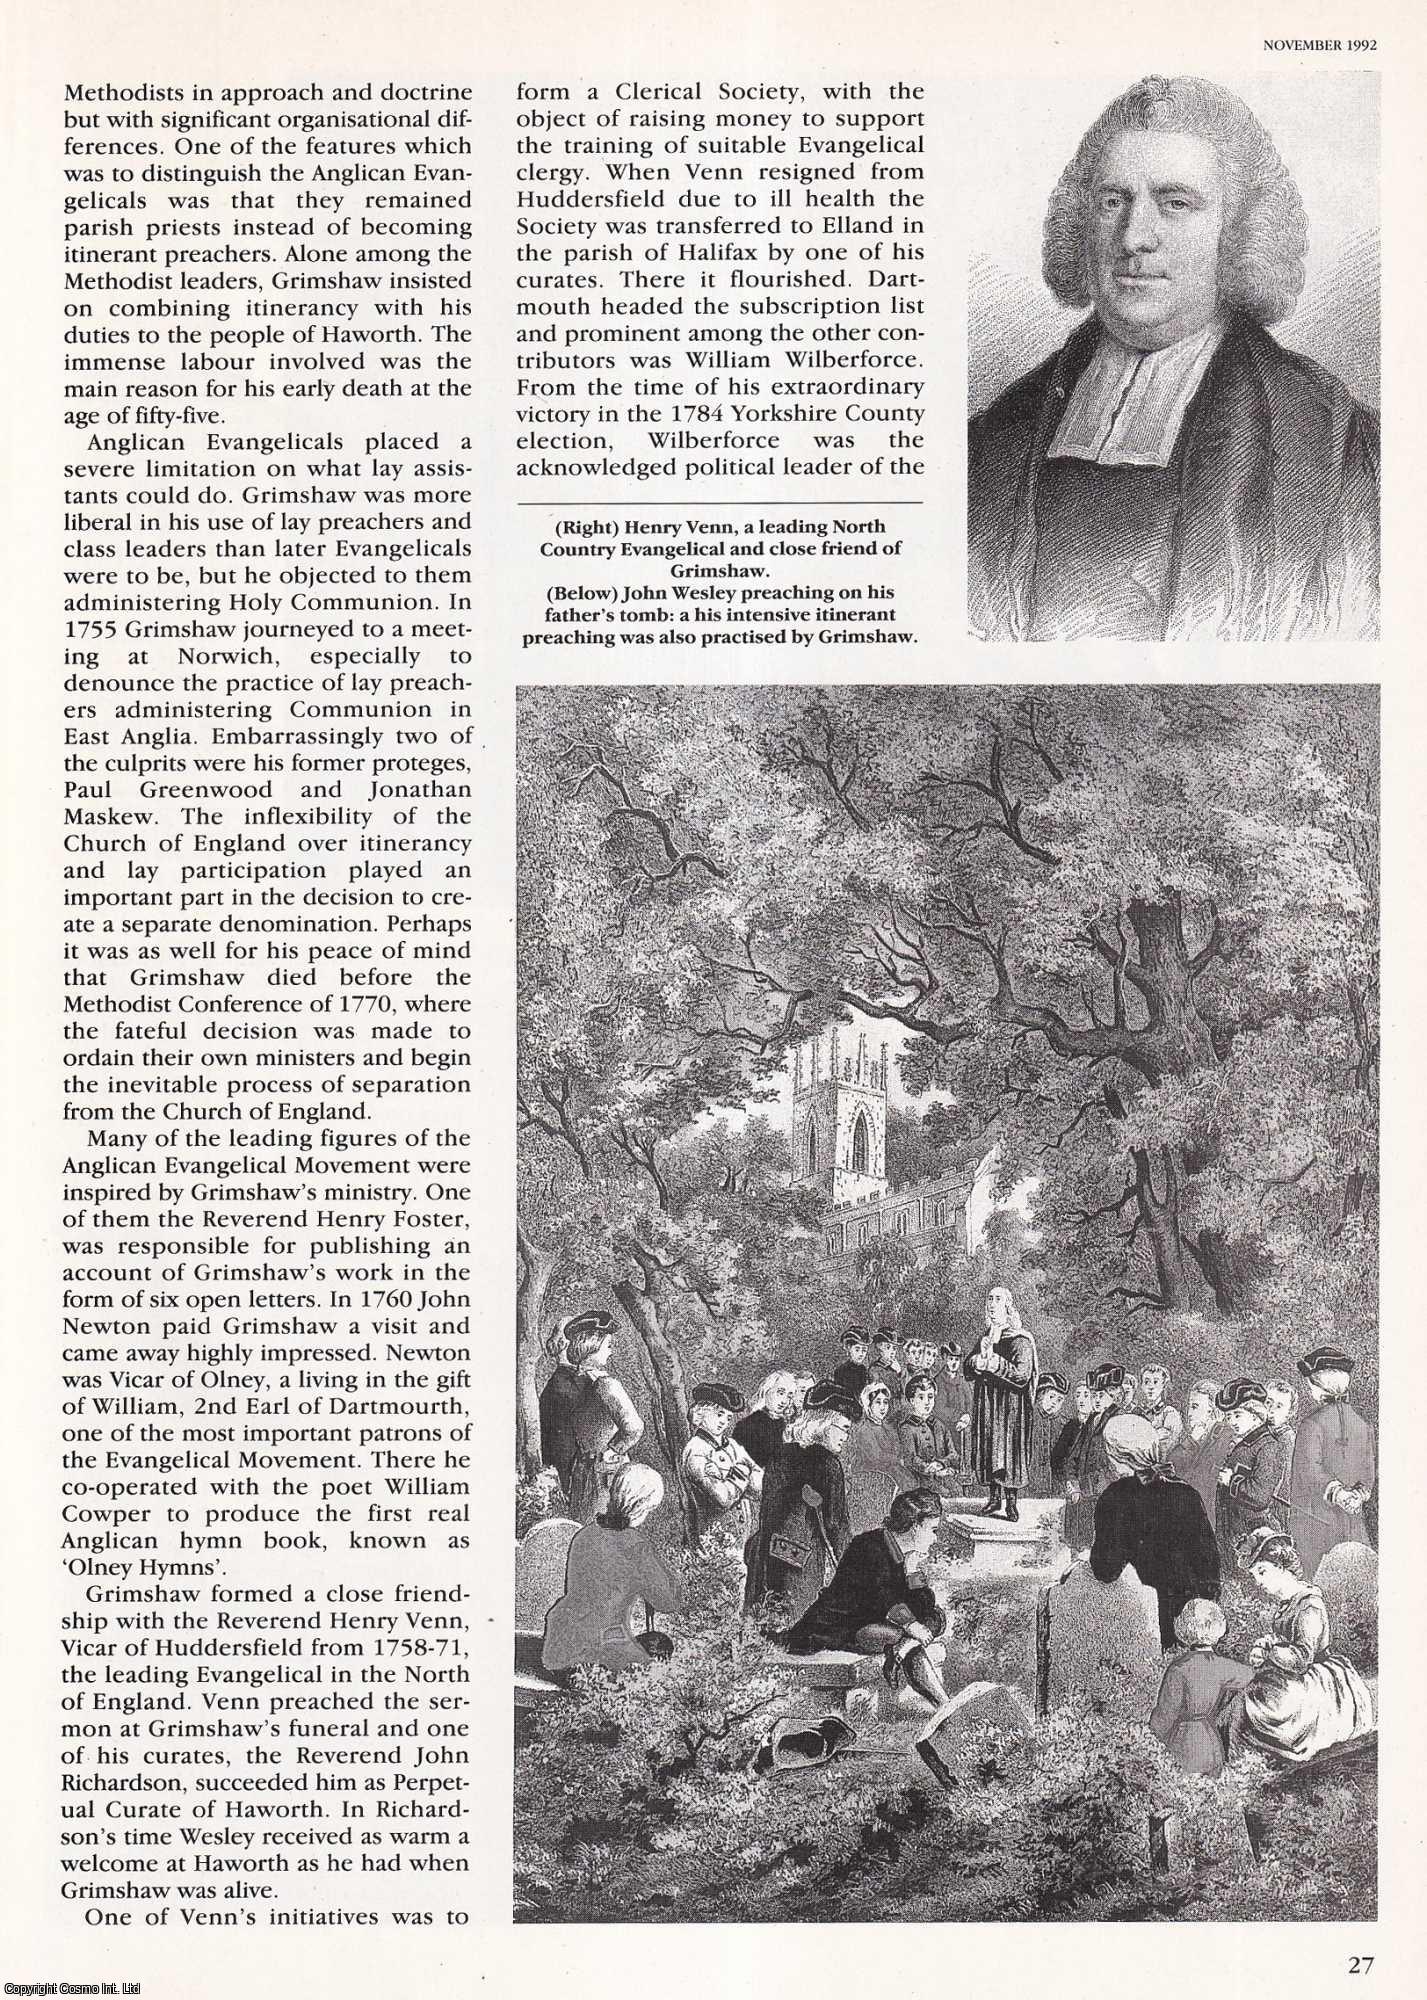 Michael Baumber - William Grimshaw, Patrick Bronte and the Evangelical Revival. An original article from History Today, 1992.